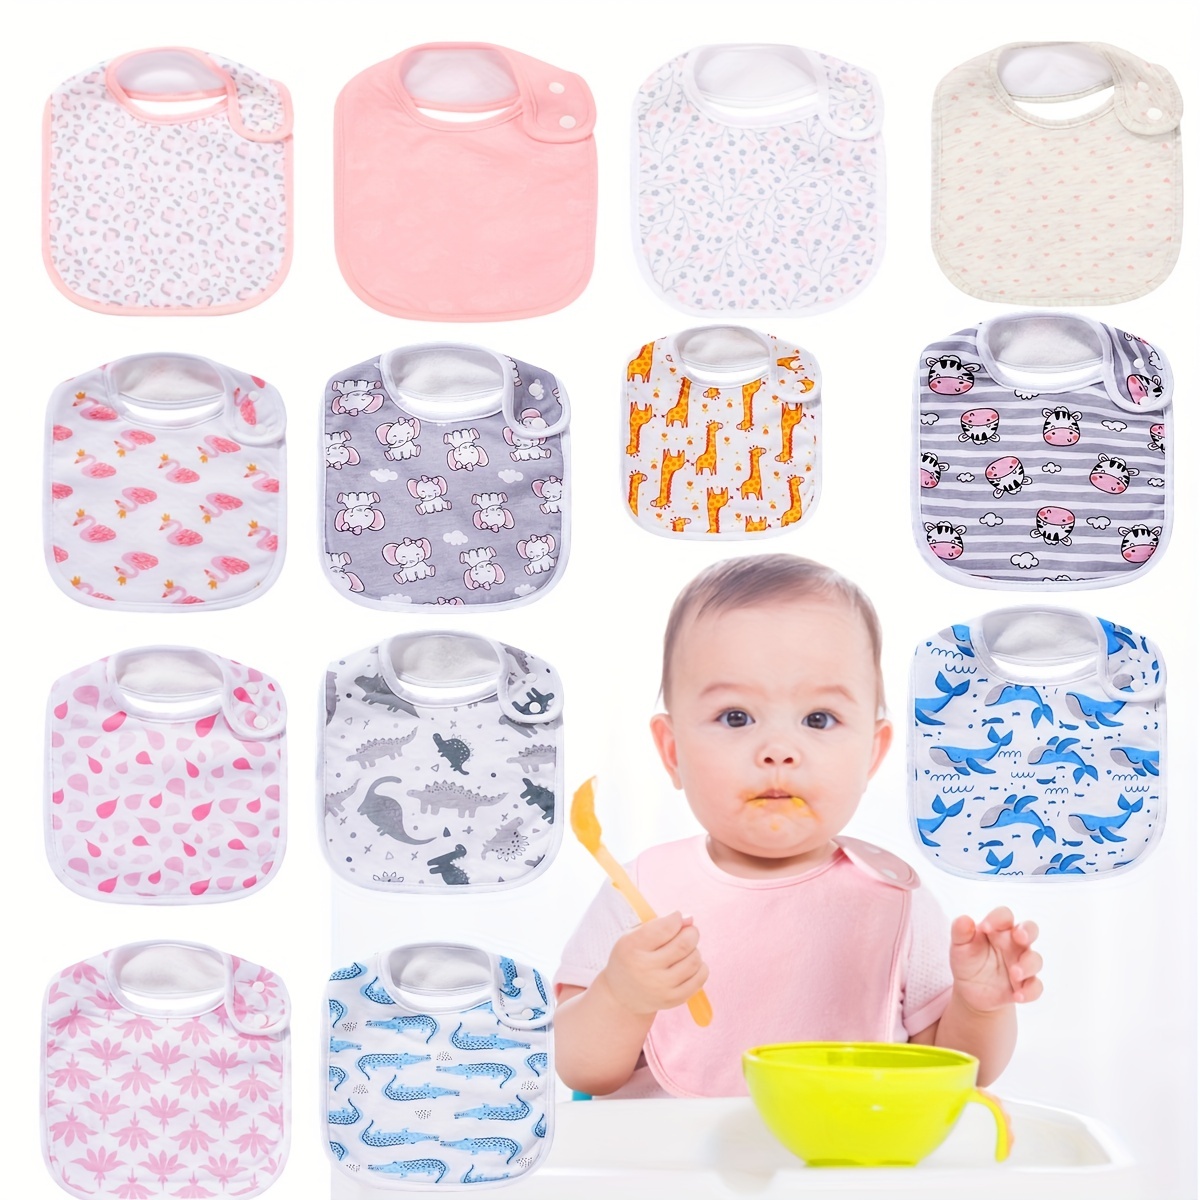 4pcs Baby Cotton Absorbent Bibs for Drooling Teething